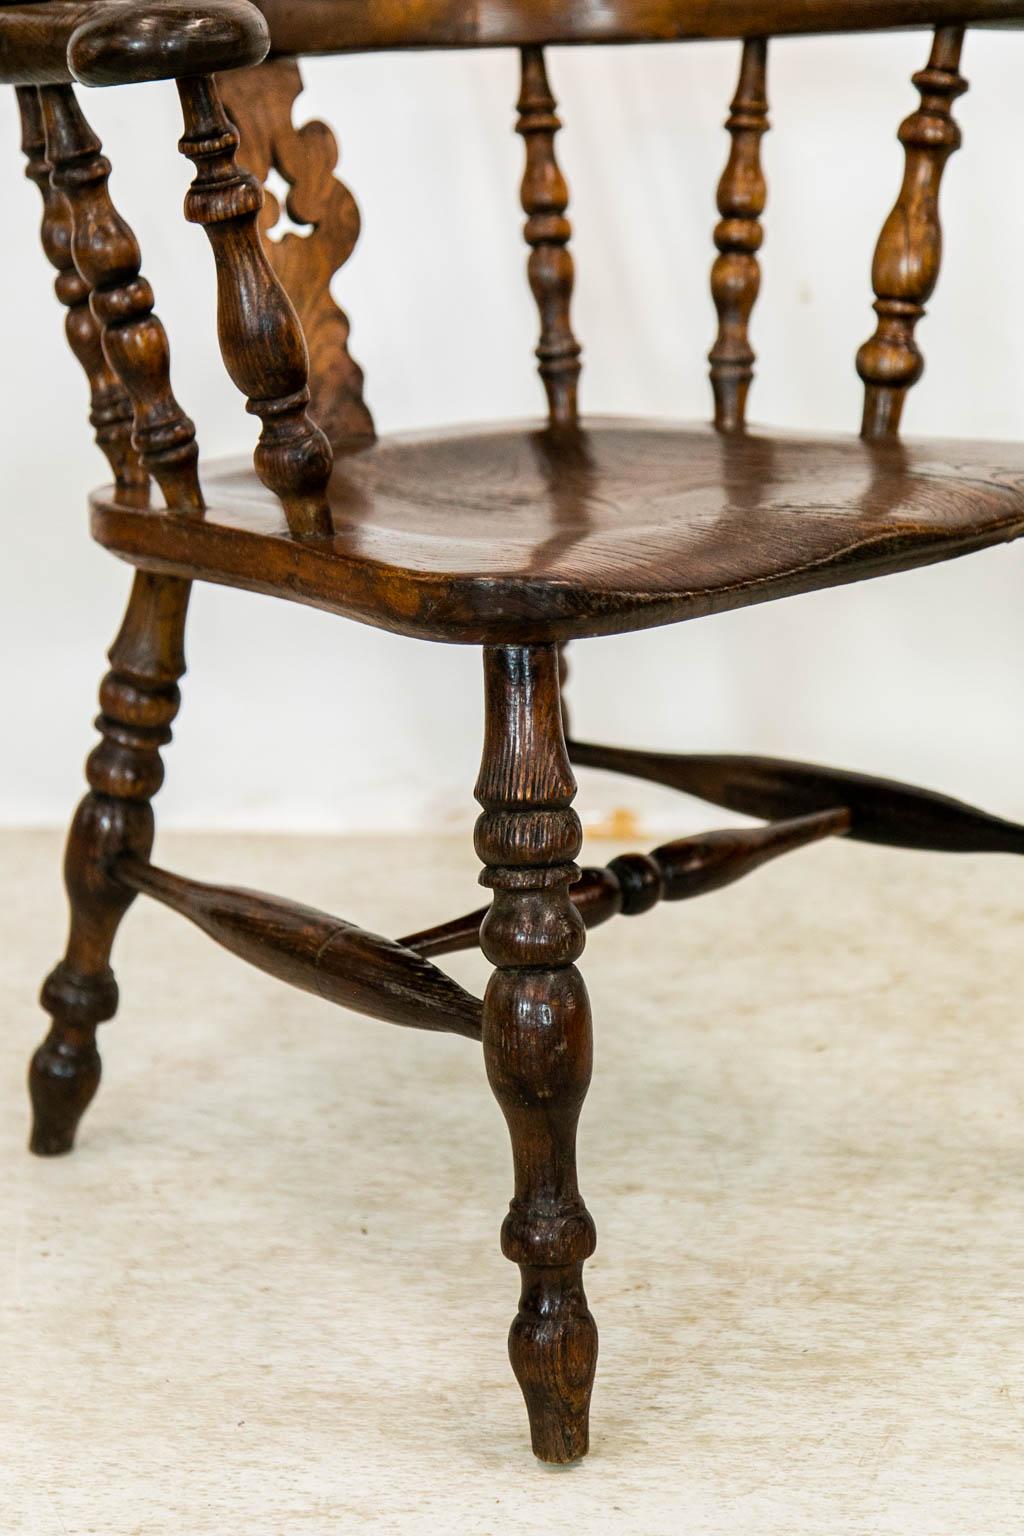 Late 19th Century Oak and Elm Broad Arm Windsor Chair For Sale